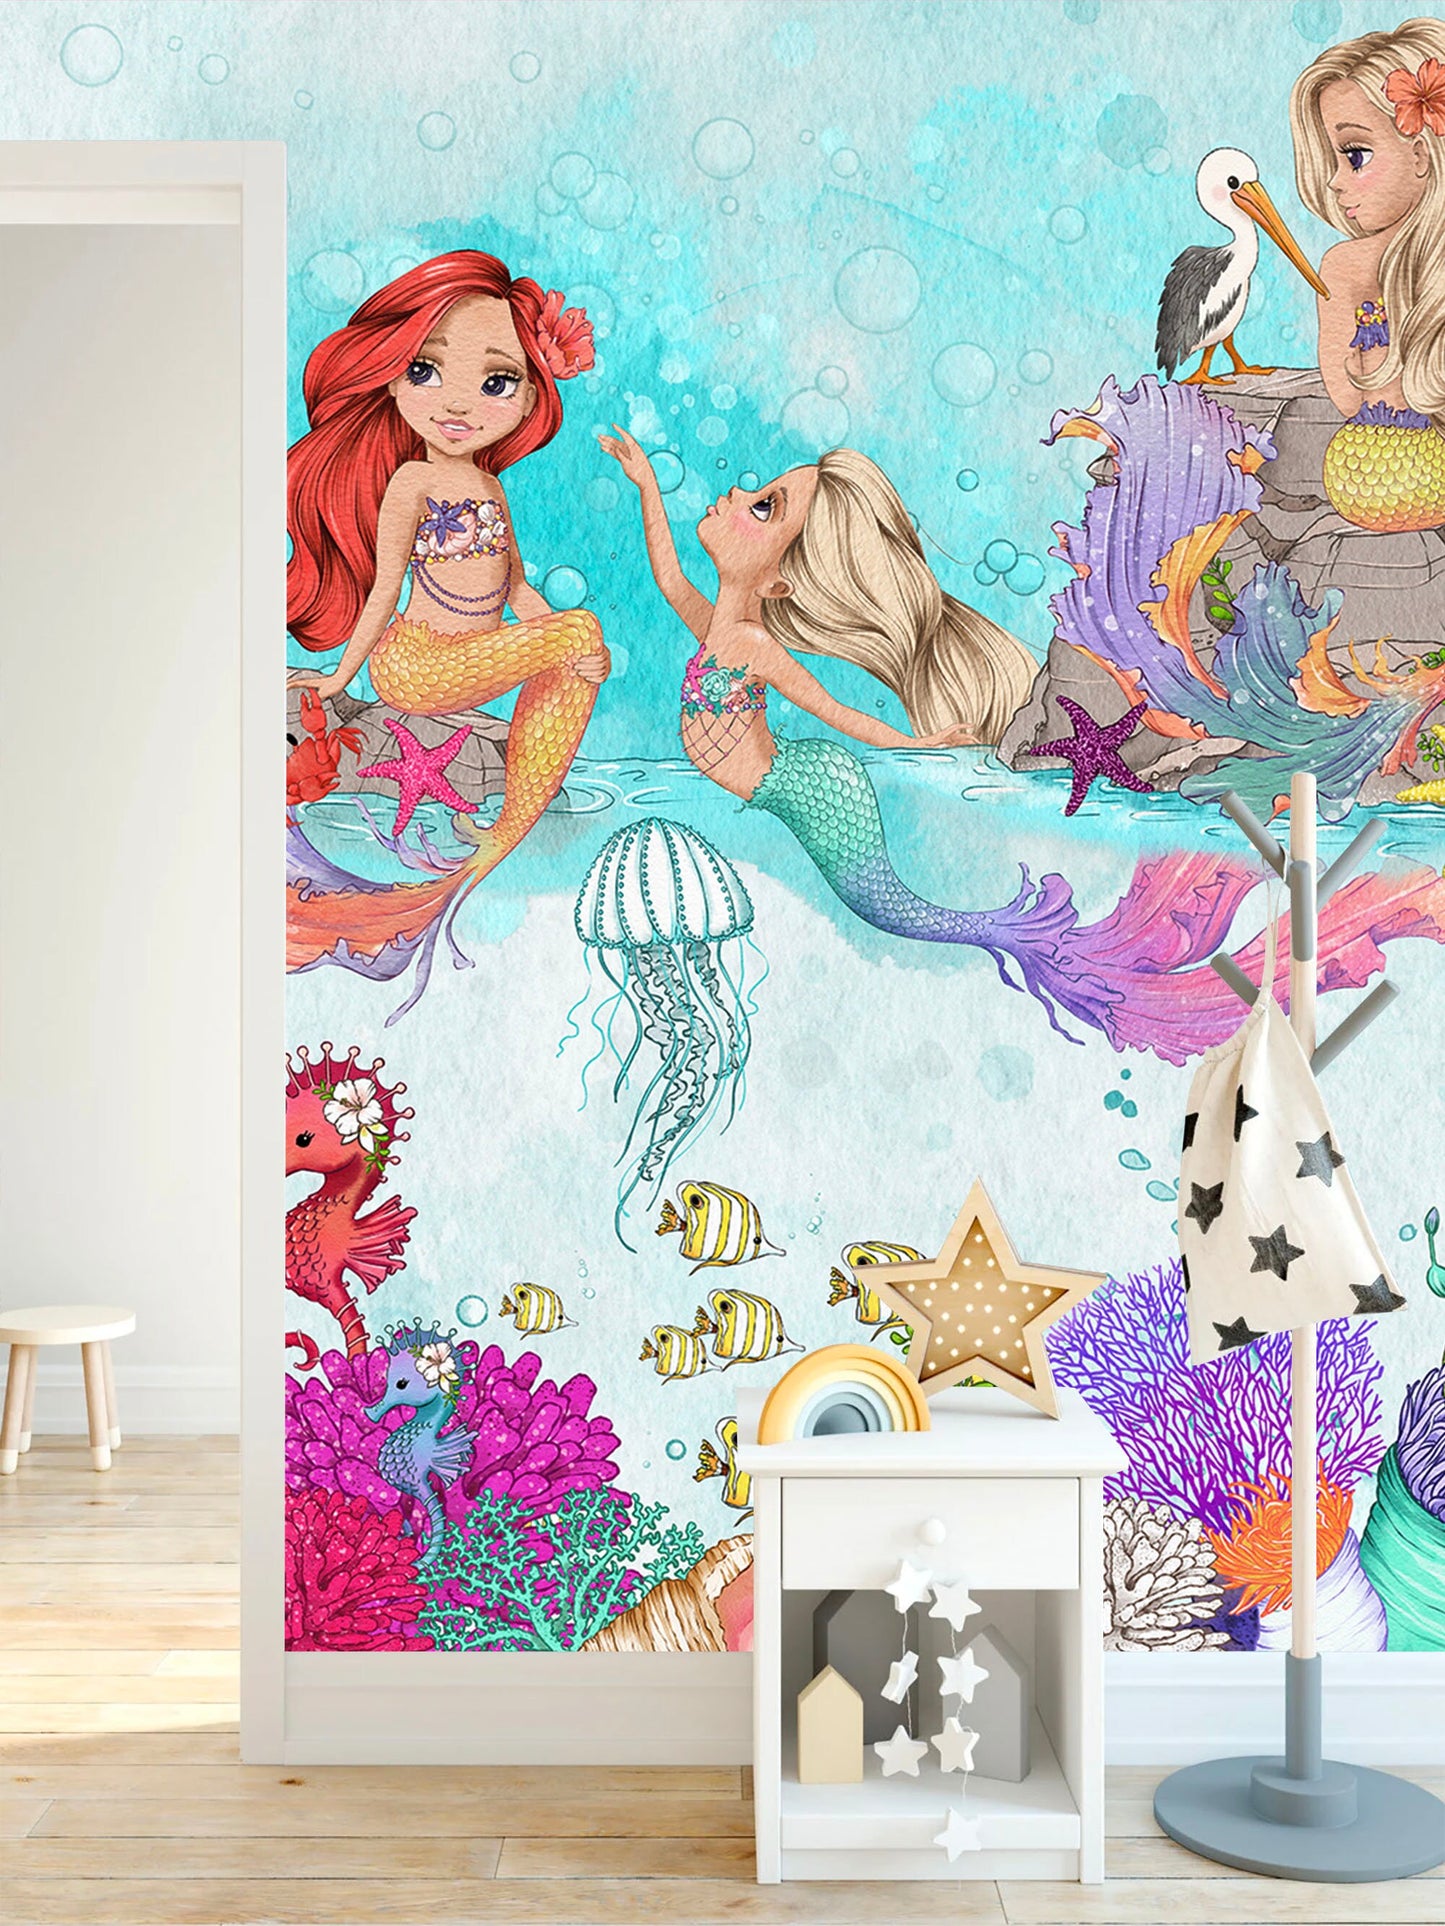 Mermaid and Jellyfish Nursery Wall Mural - Fabric Wallpaper with Seahorse Coral and Pelican Designs - WM022